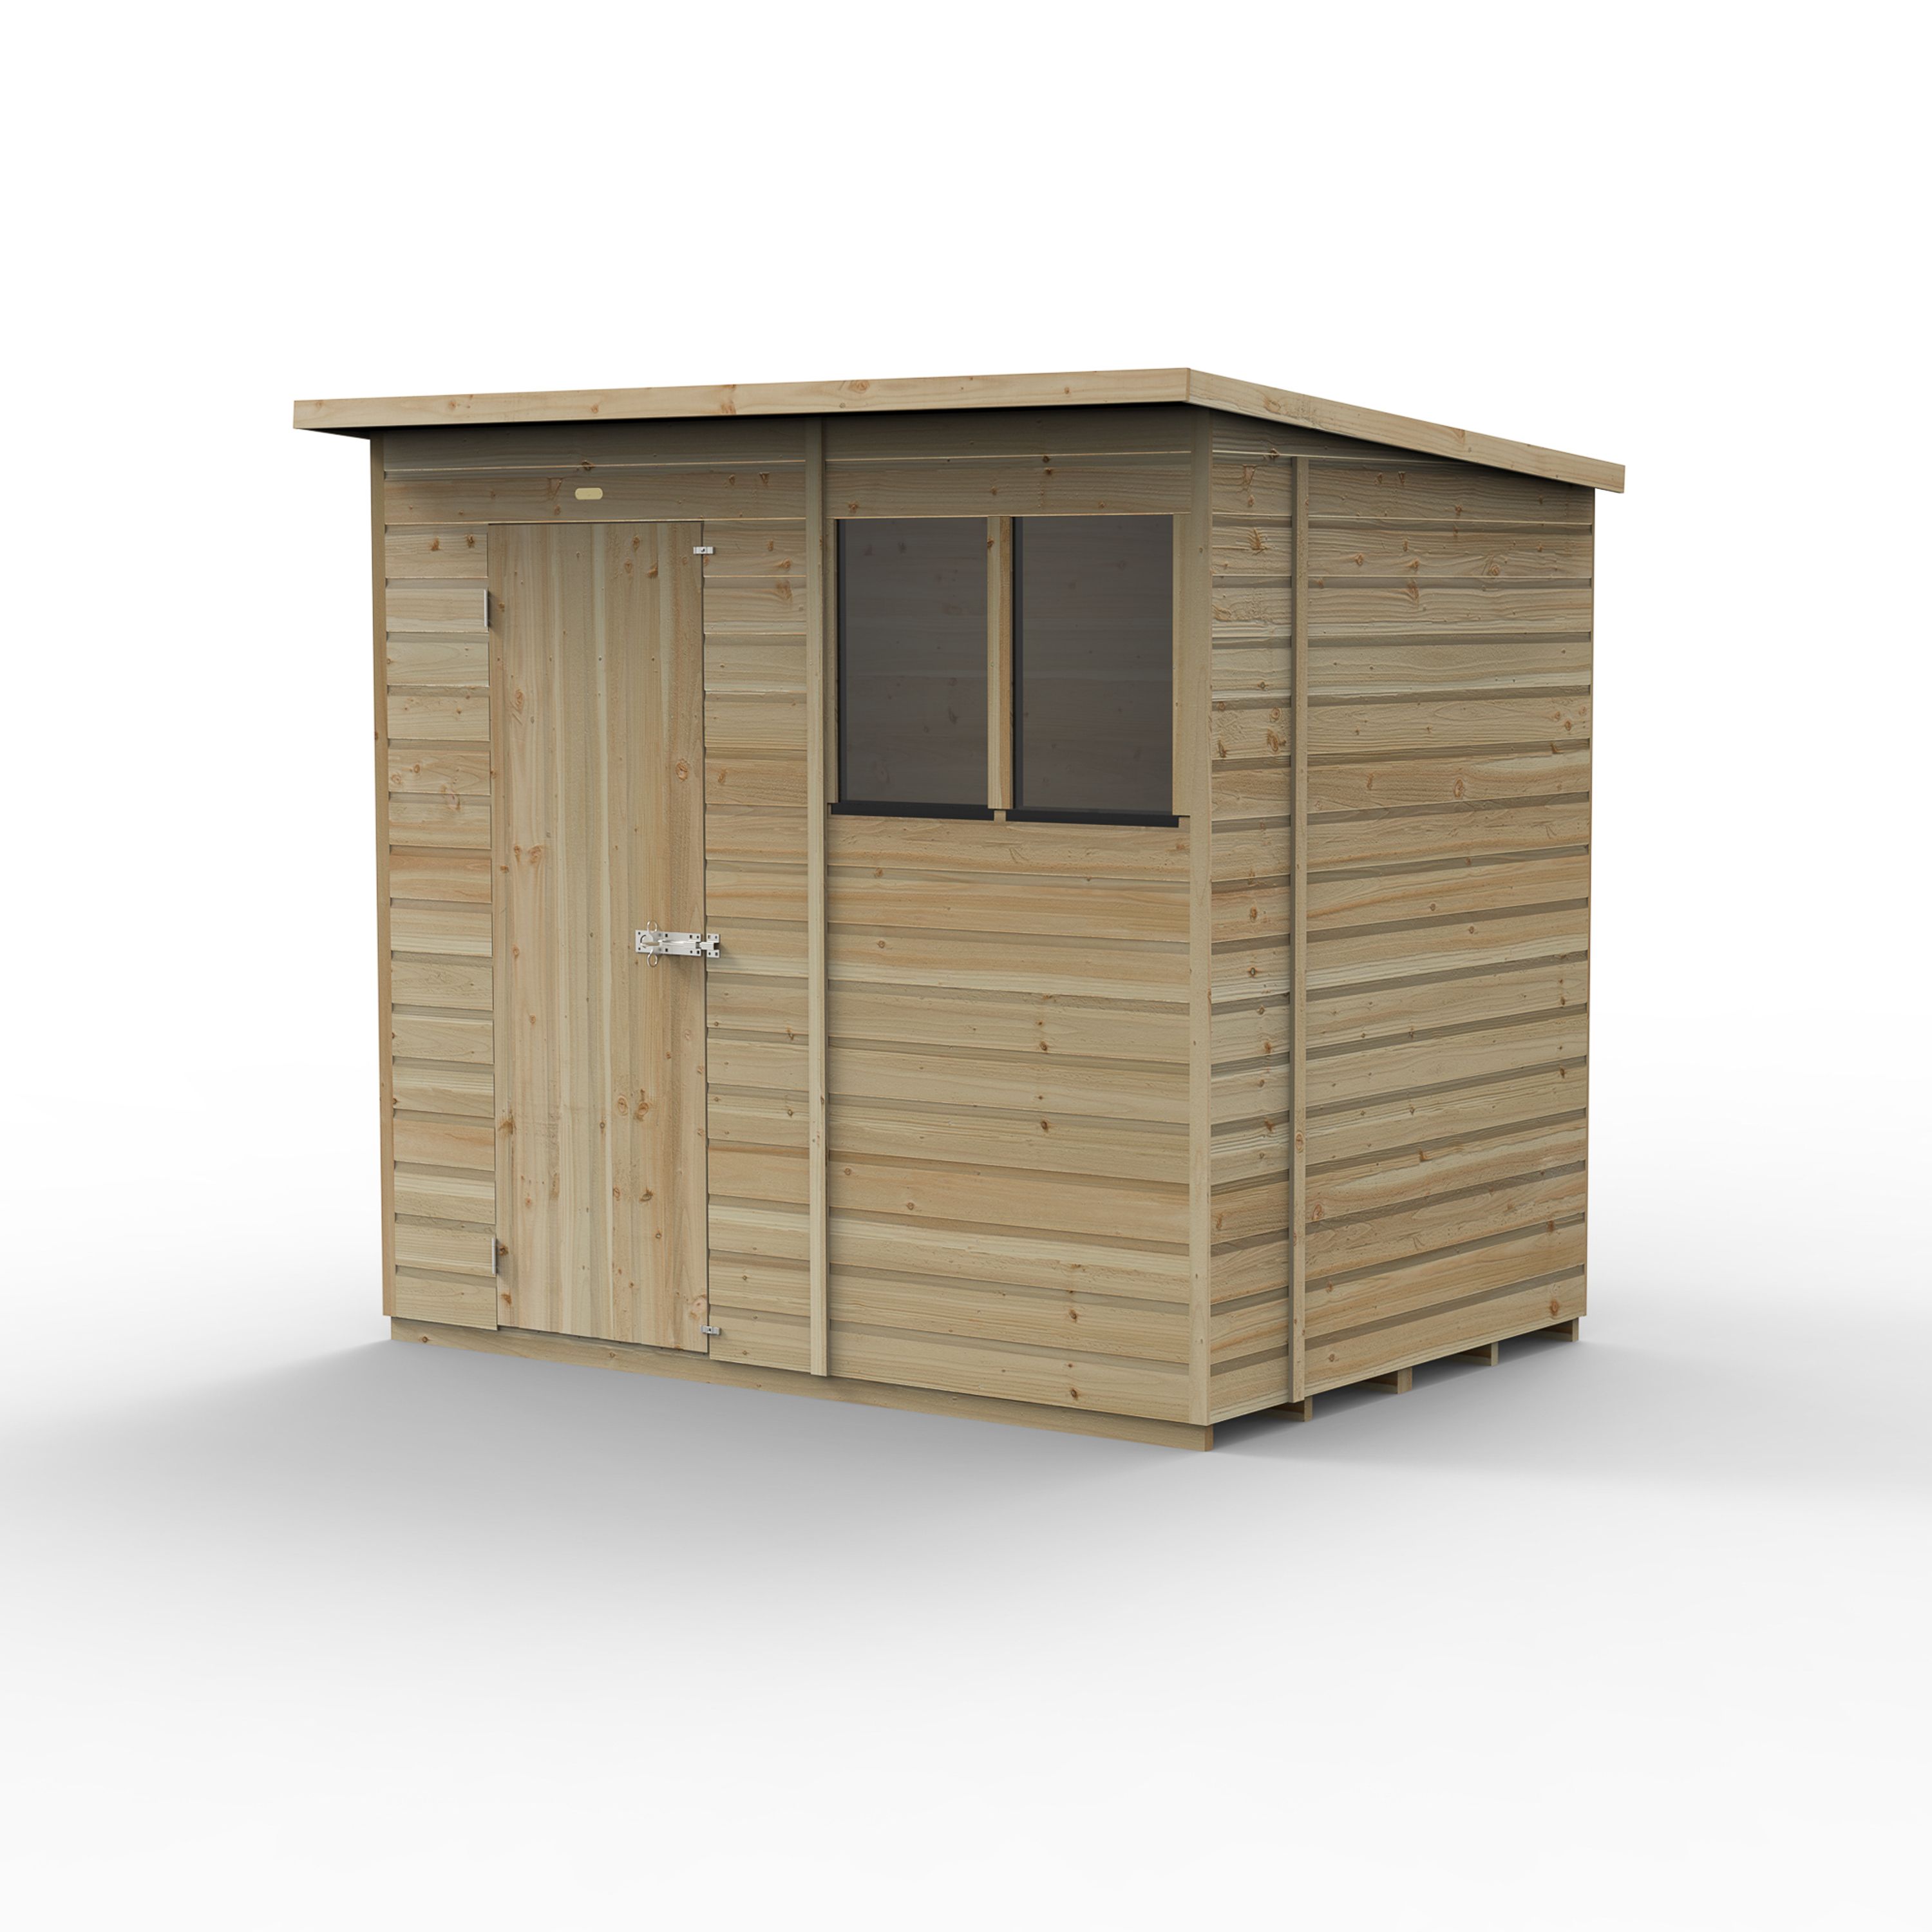 Forest Garden Beckwood 7x5 ft Pent Natural timber Wooden Shed with floor & 2 windows - Assembly not required